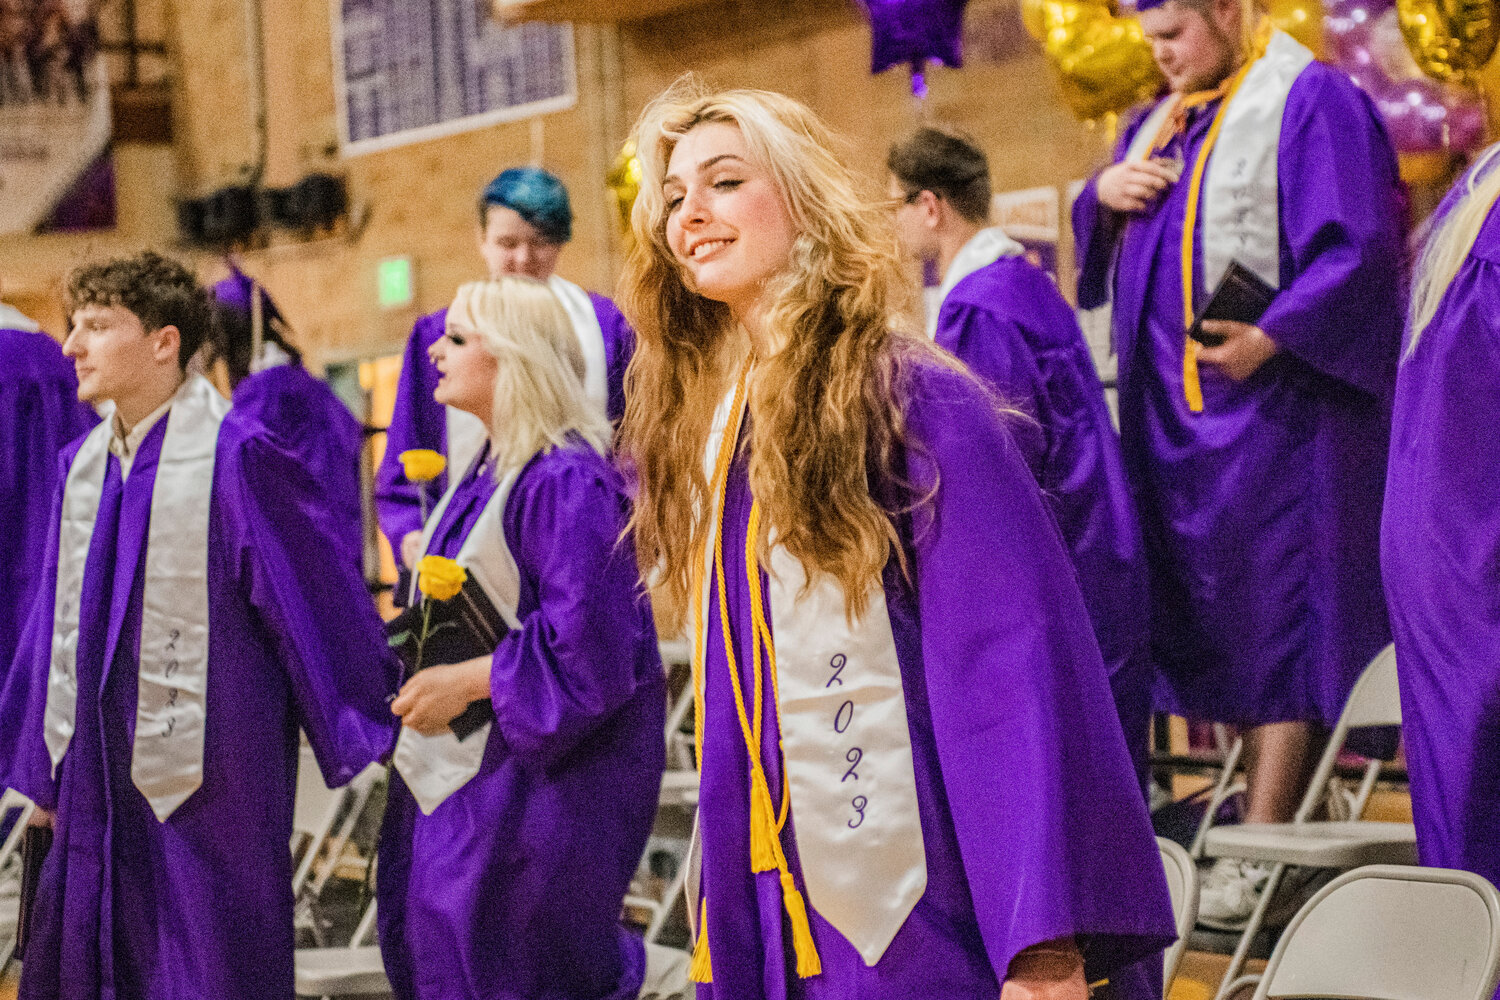 Keira Krenik smiles as she walks off the stage in the Onalaska High School gym after graduating on Friday night. Diploma in hand, Krenik joins Onalaska’s 100th graduating class. She marked her secondary career with high honors, earning a GPA between 3.5 and 3.99.